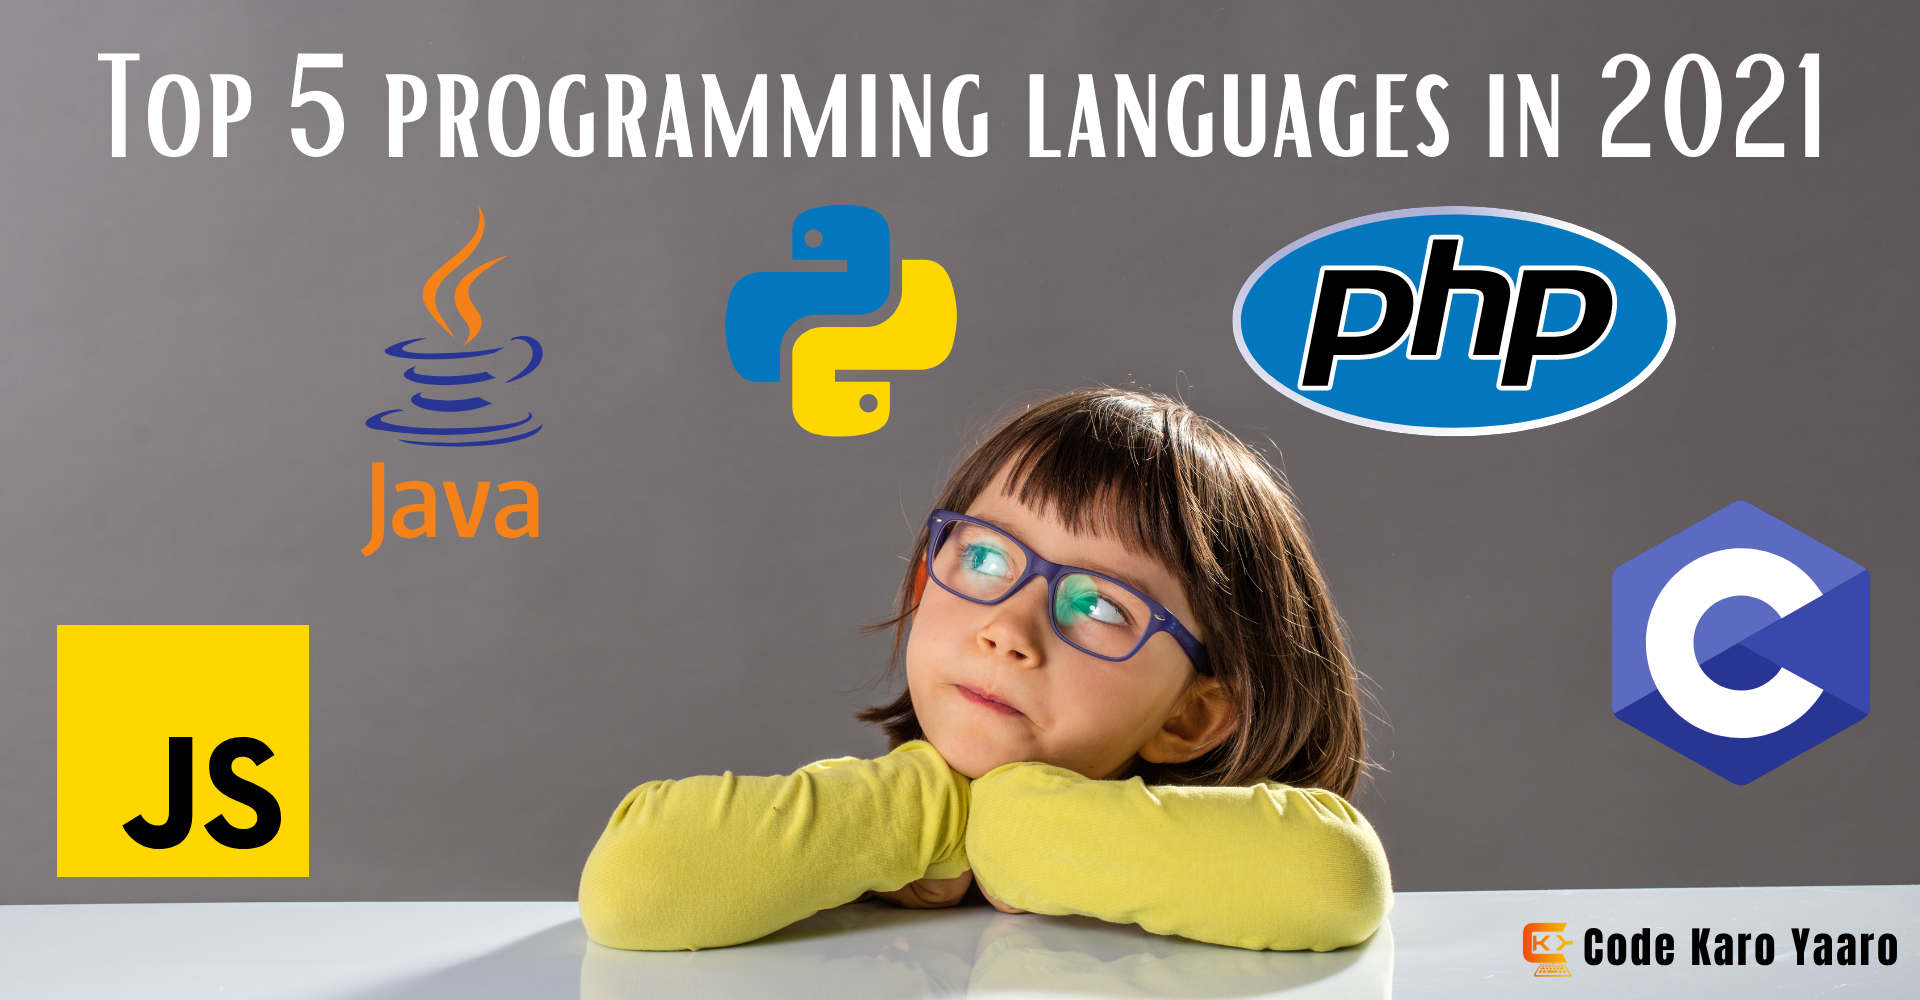 Online Coding Classes for Kids Top 5 Programming Languages in 2021